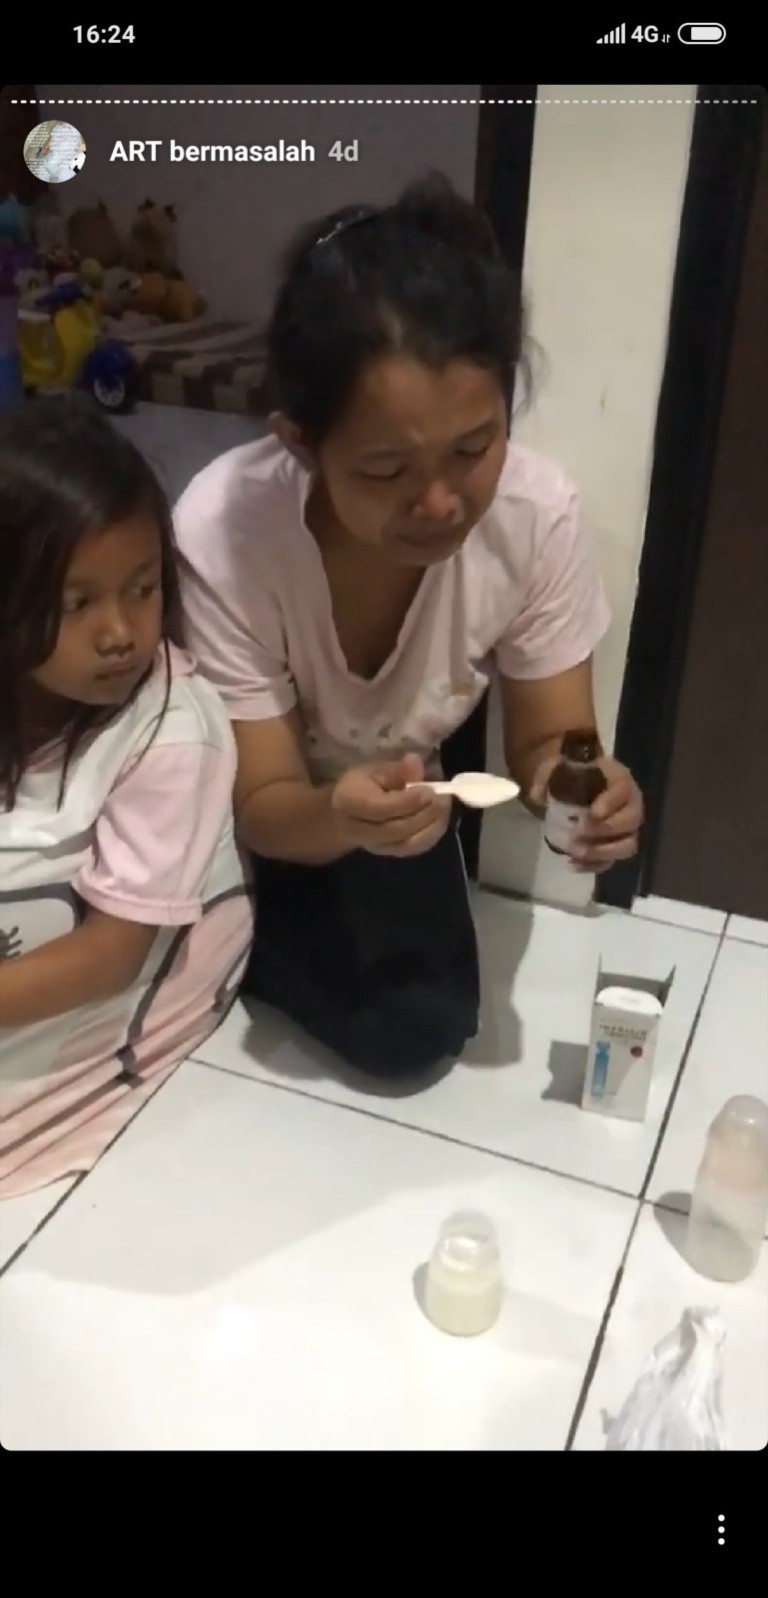 indonesian-babysitter-adds-sleeping-medicine-into-babys-bottle-knocking-him-out-until-his-mother-notices-world-of-buzz-2-768x1598